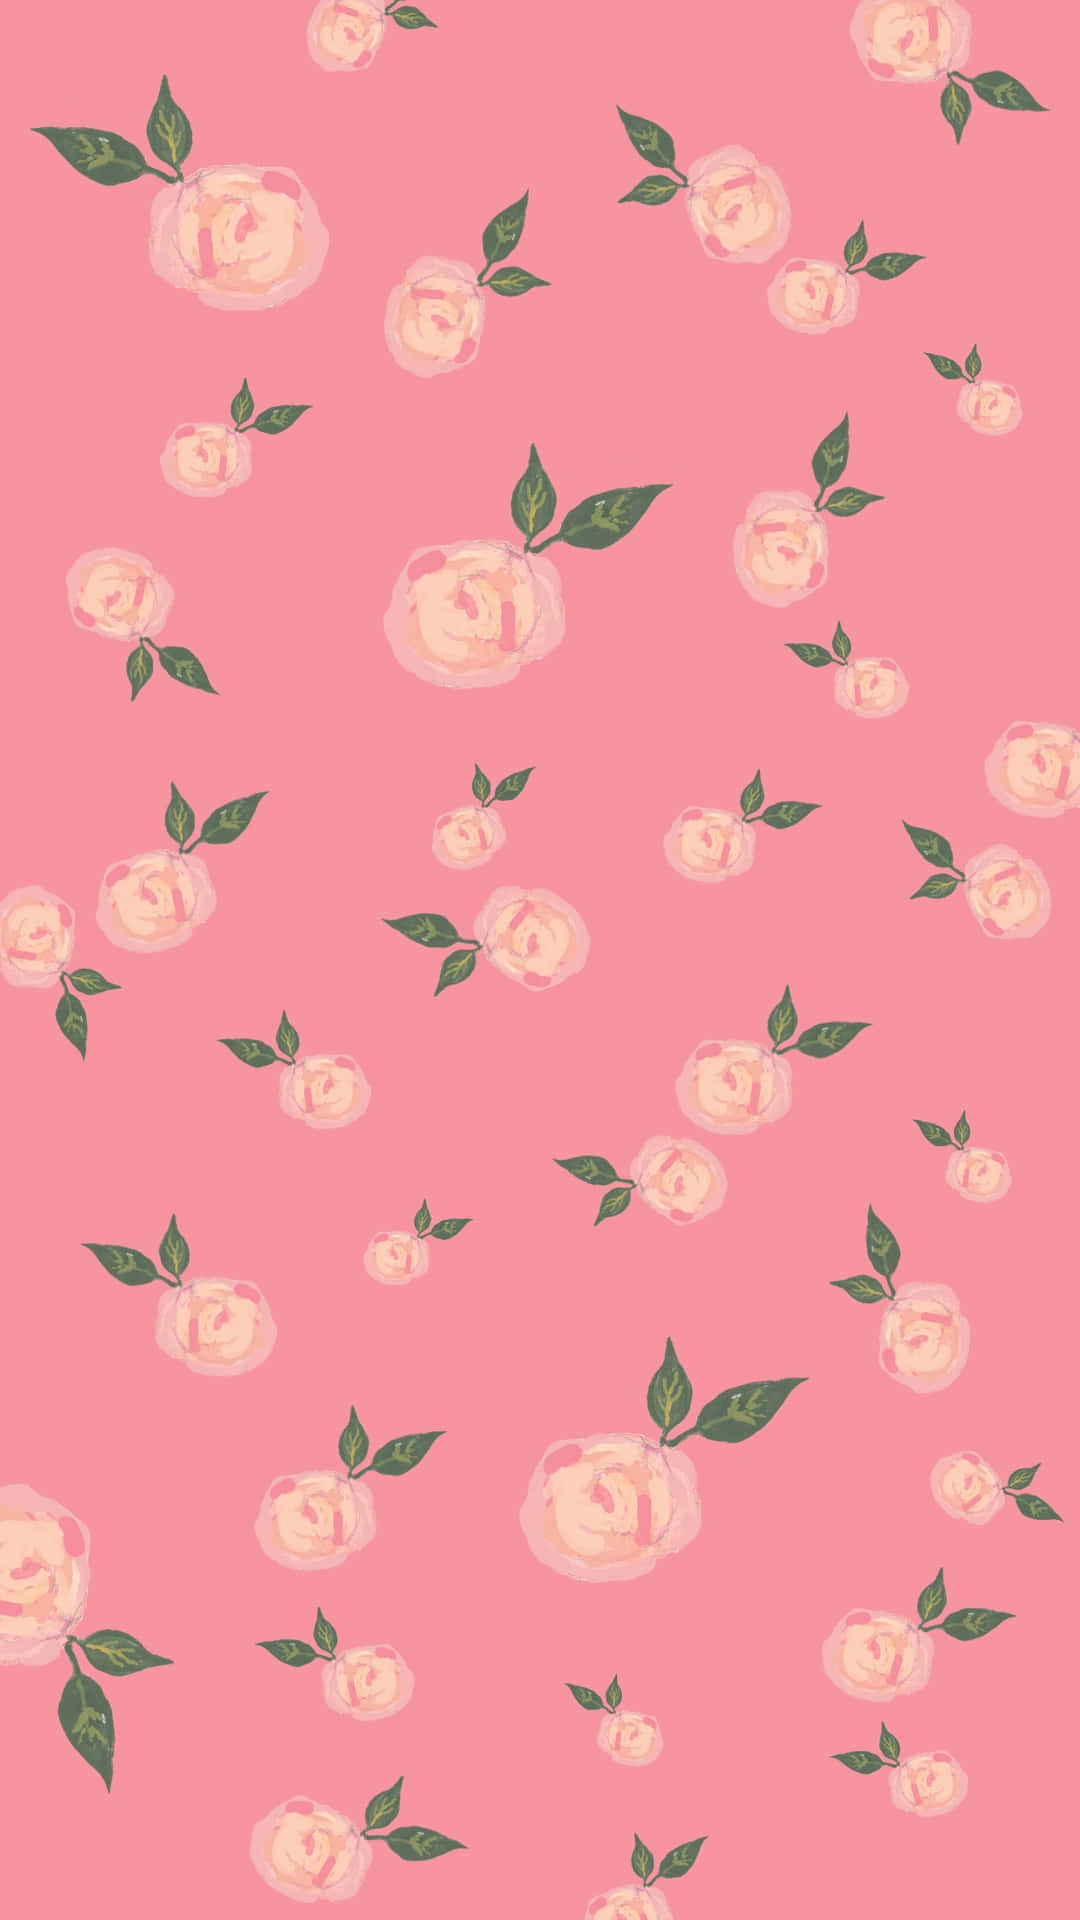 Kawaii Valentines Fabric Wallpaper and Home Decor  Spoonflower